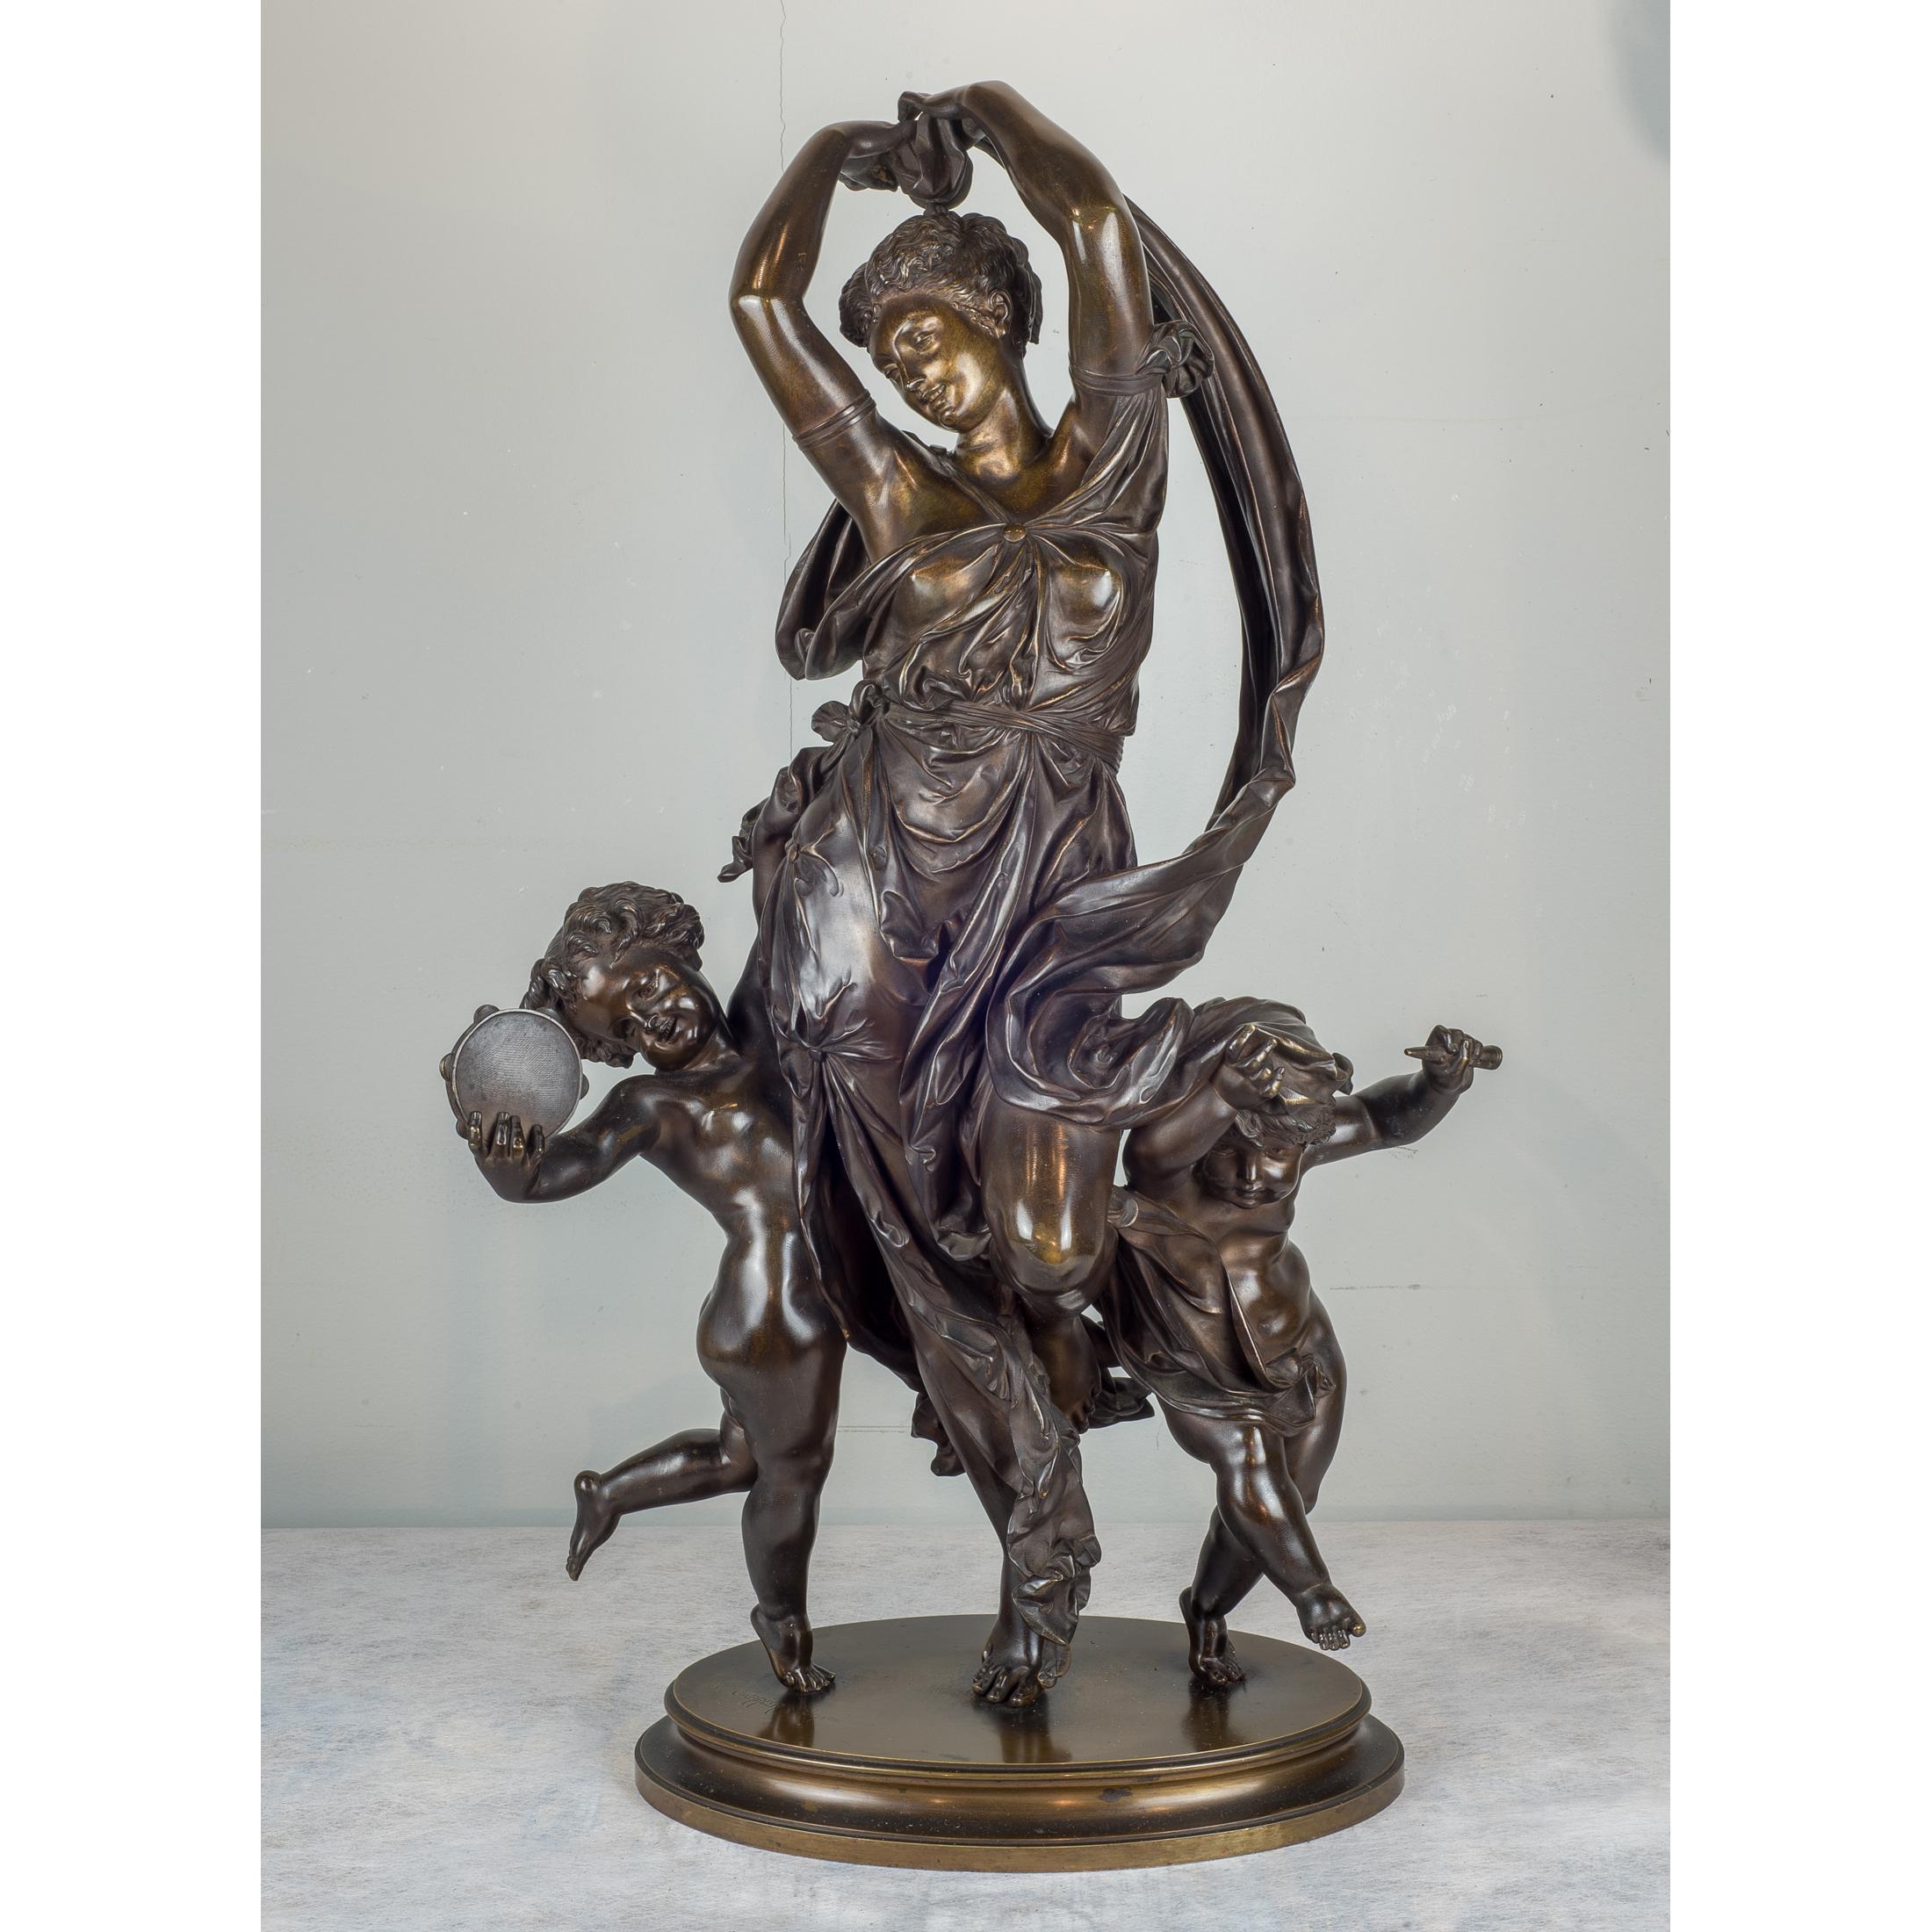 Inscribed 'A CARRIER Scpteur'

Title: A Maenad and Two Cherubs
Artist: Auguste-Joseph Carrier (1837-1908)
Origin: French
Date: 19th century
Dimension: 27 in. x 16 in.